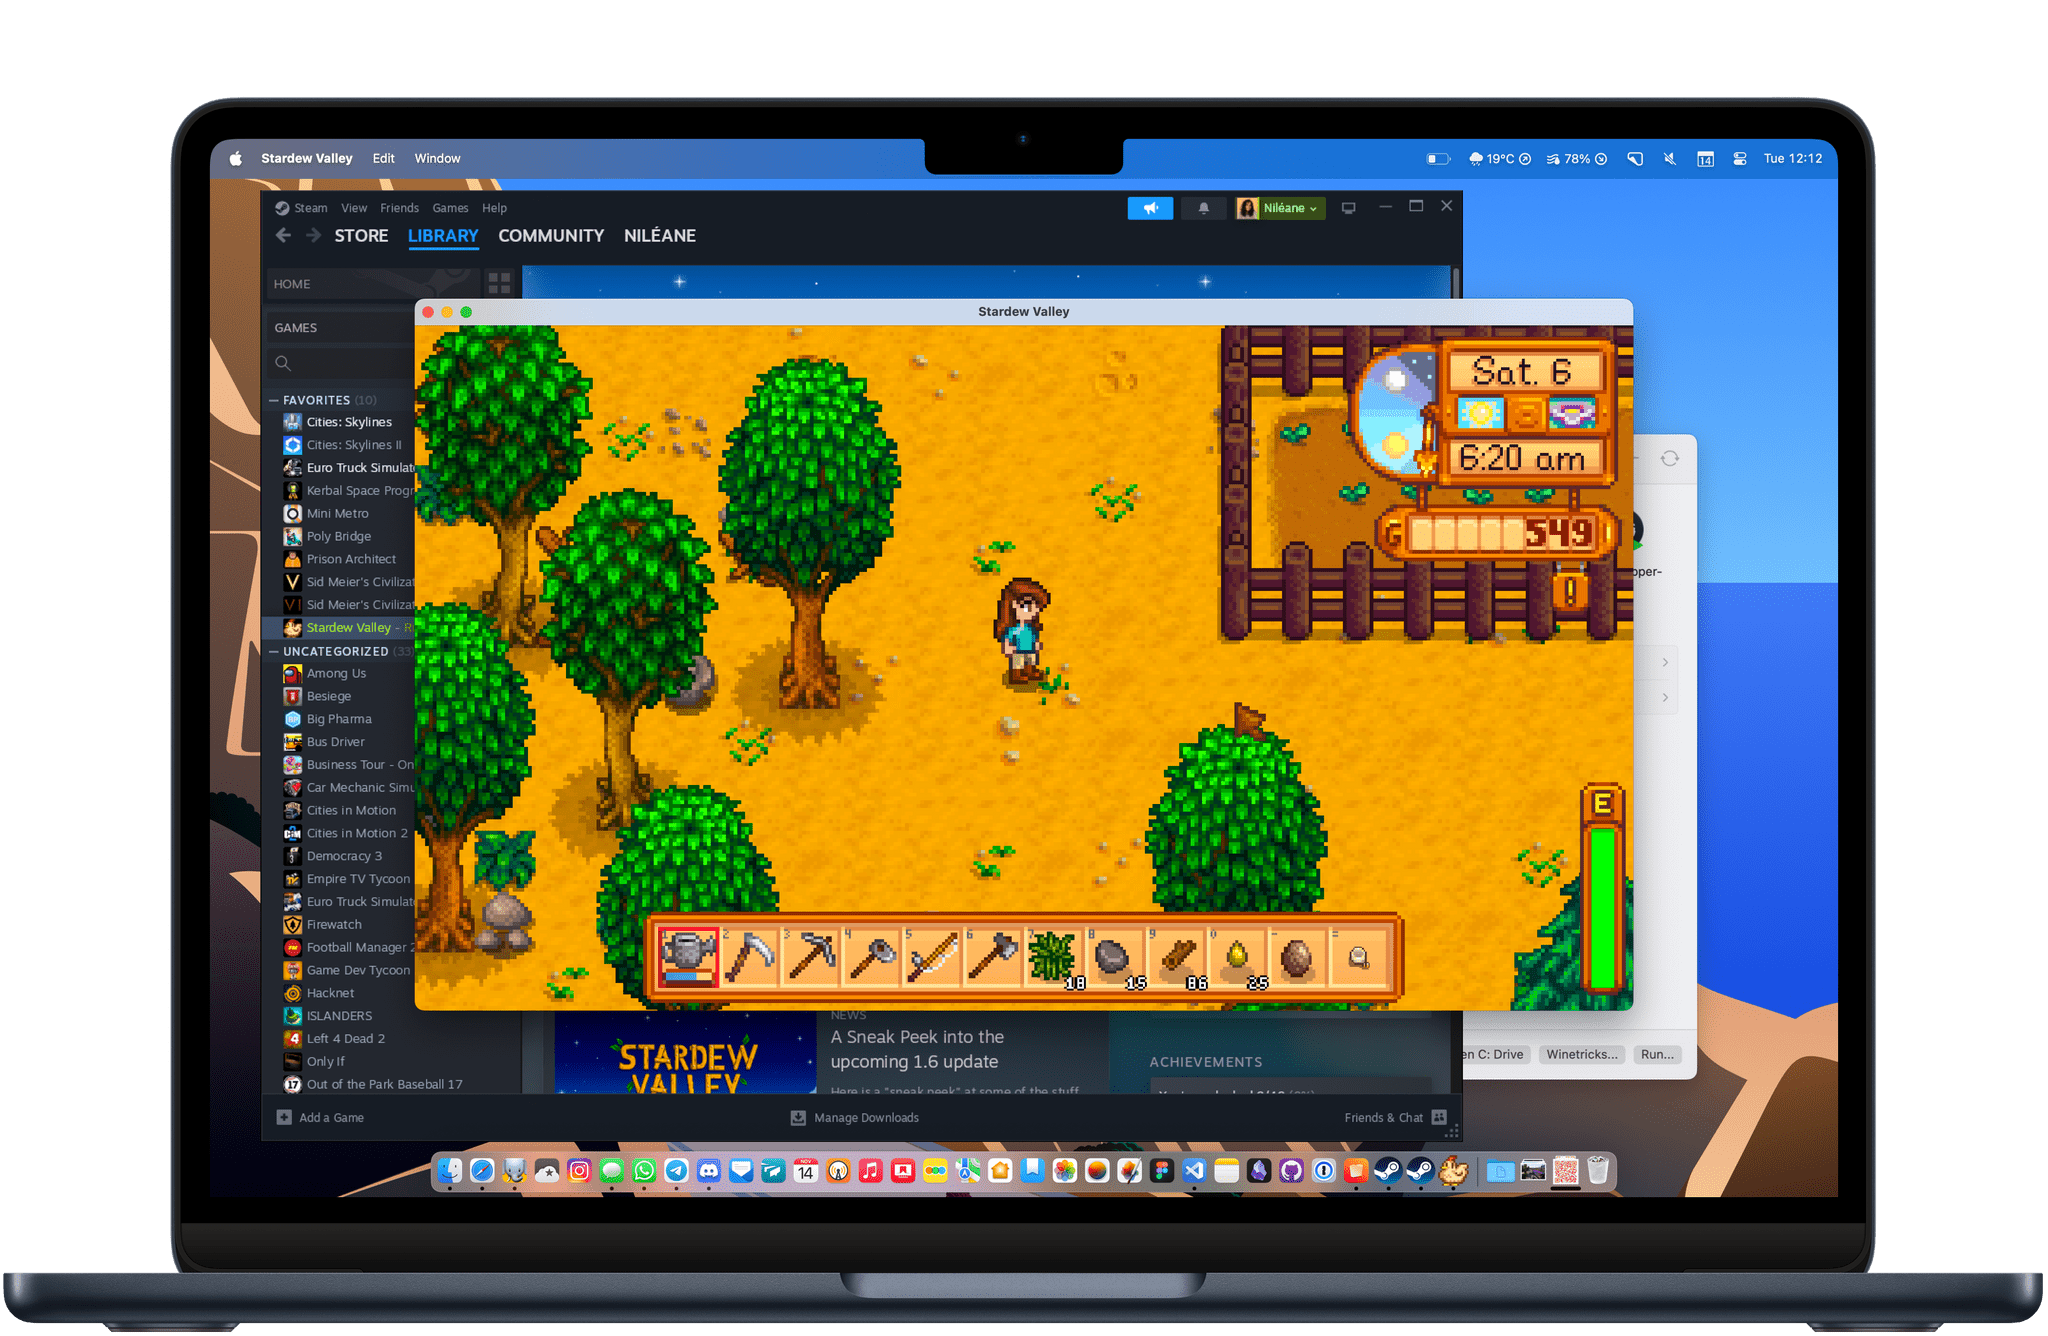 Stardew Valley can run natively on macOS, but installing the Windows version allowed me to resume an old save I had started on my previous Windows PC. Whisky is a great solution for running these lovely indie games that are not always available on macOS.